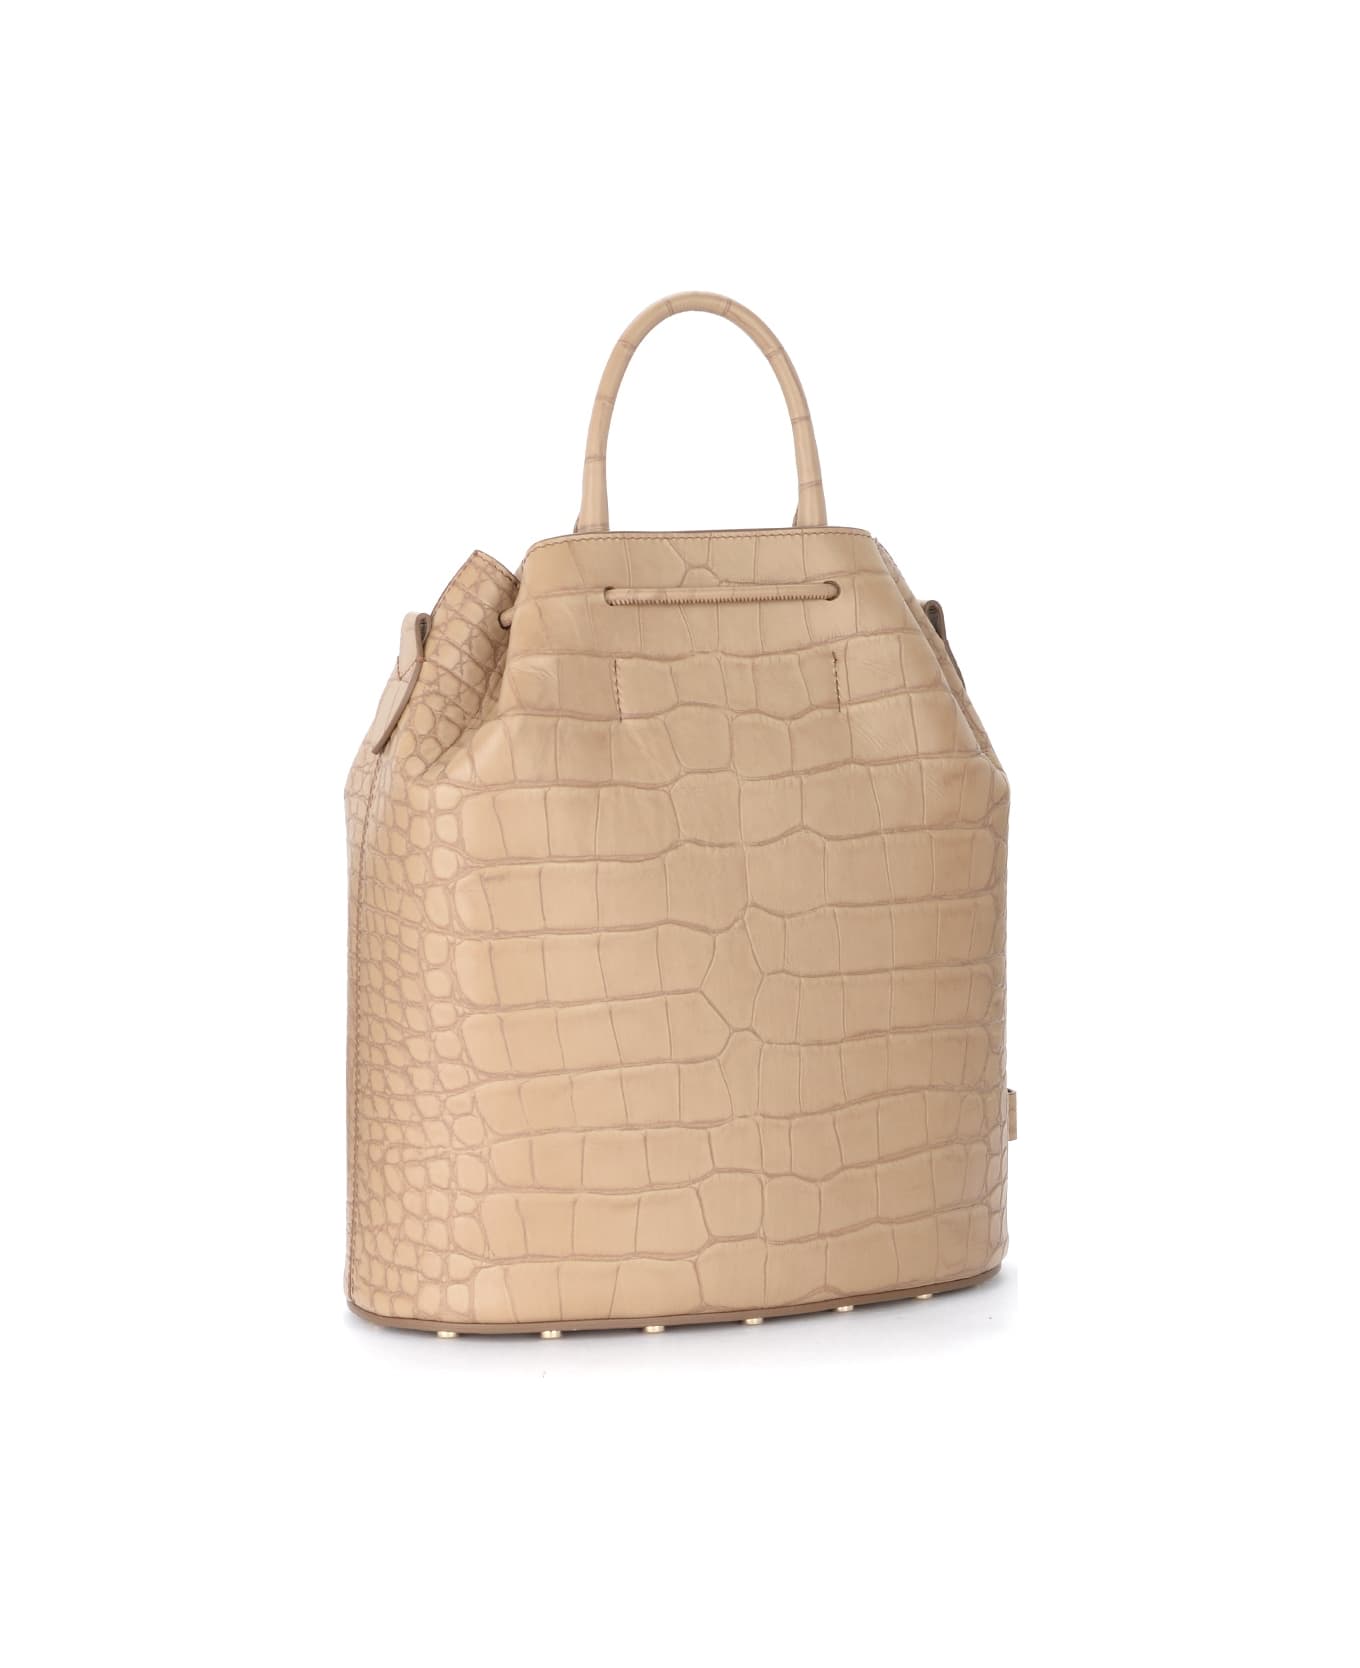 Max Mara large Bag In Camel Color Leather With Crocodile Effect - CAMEL